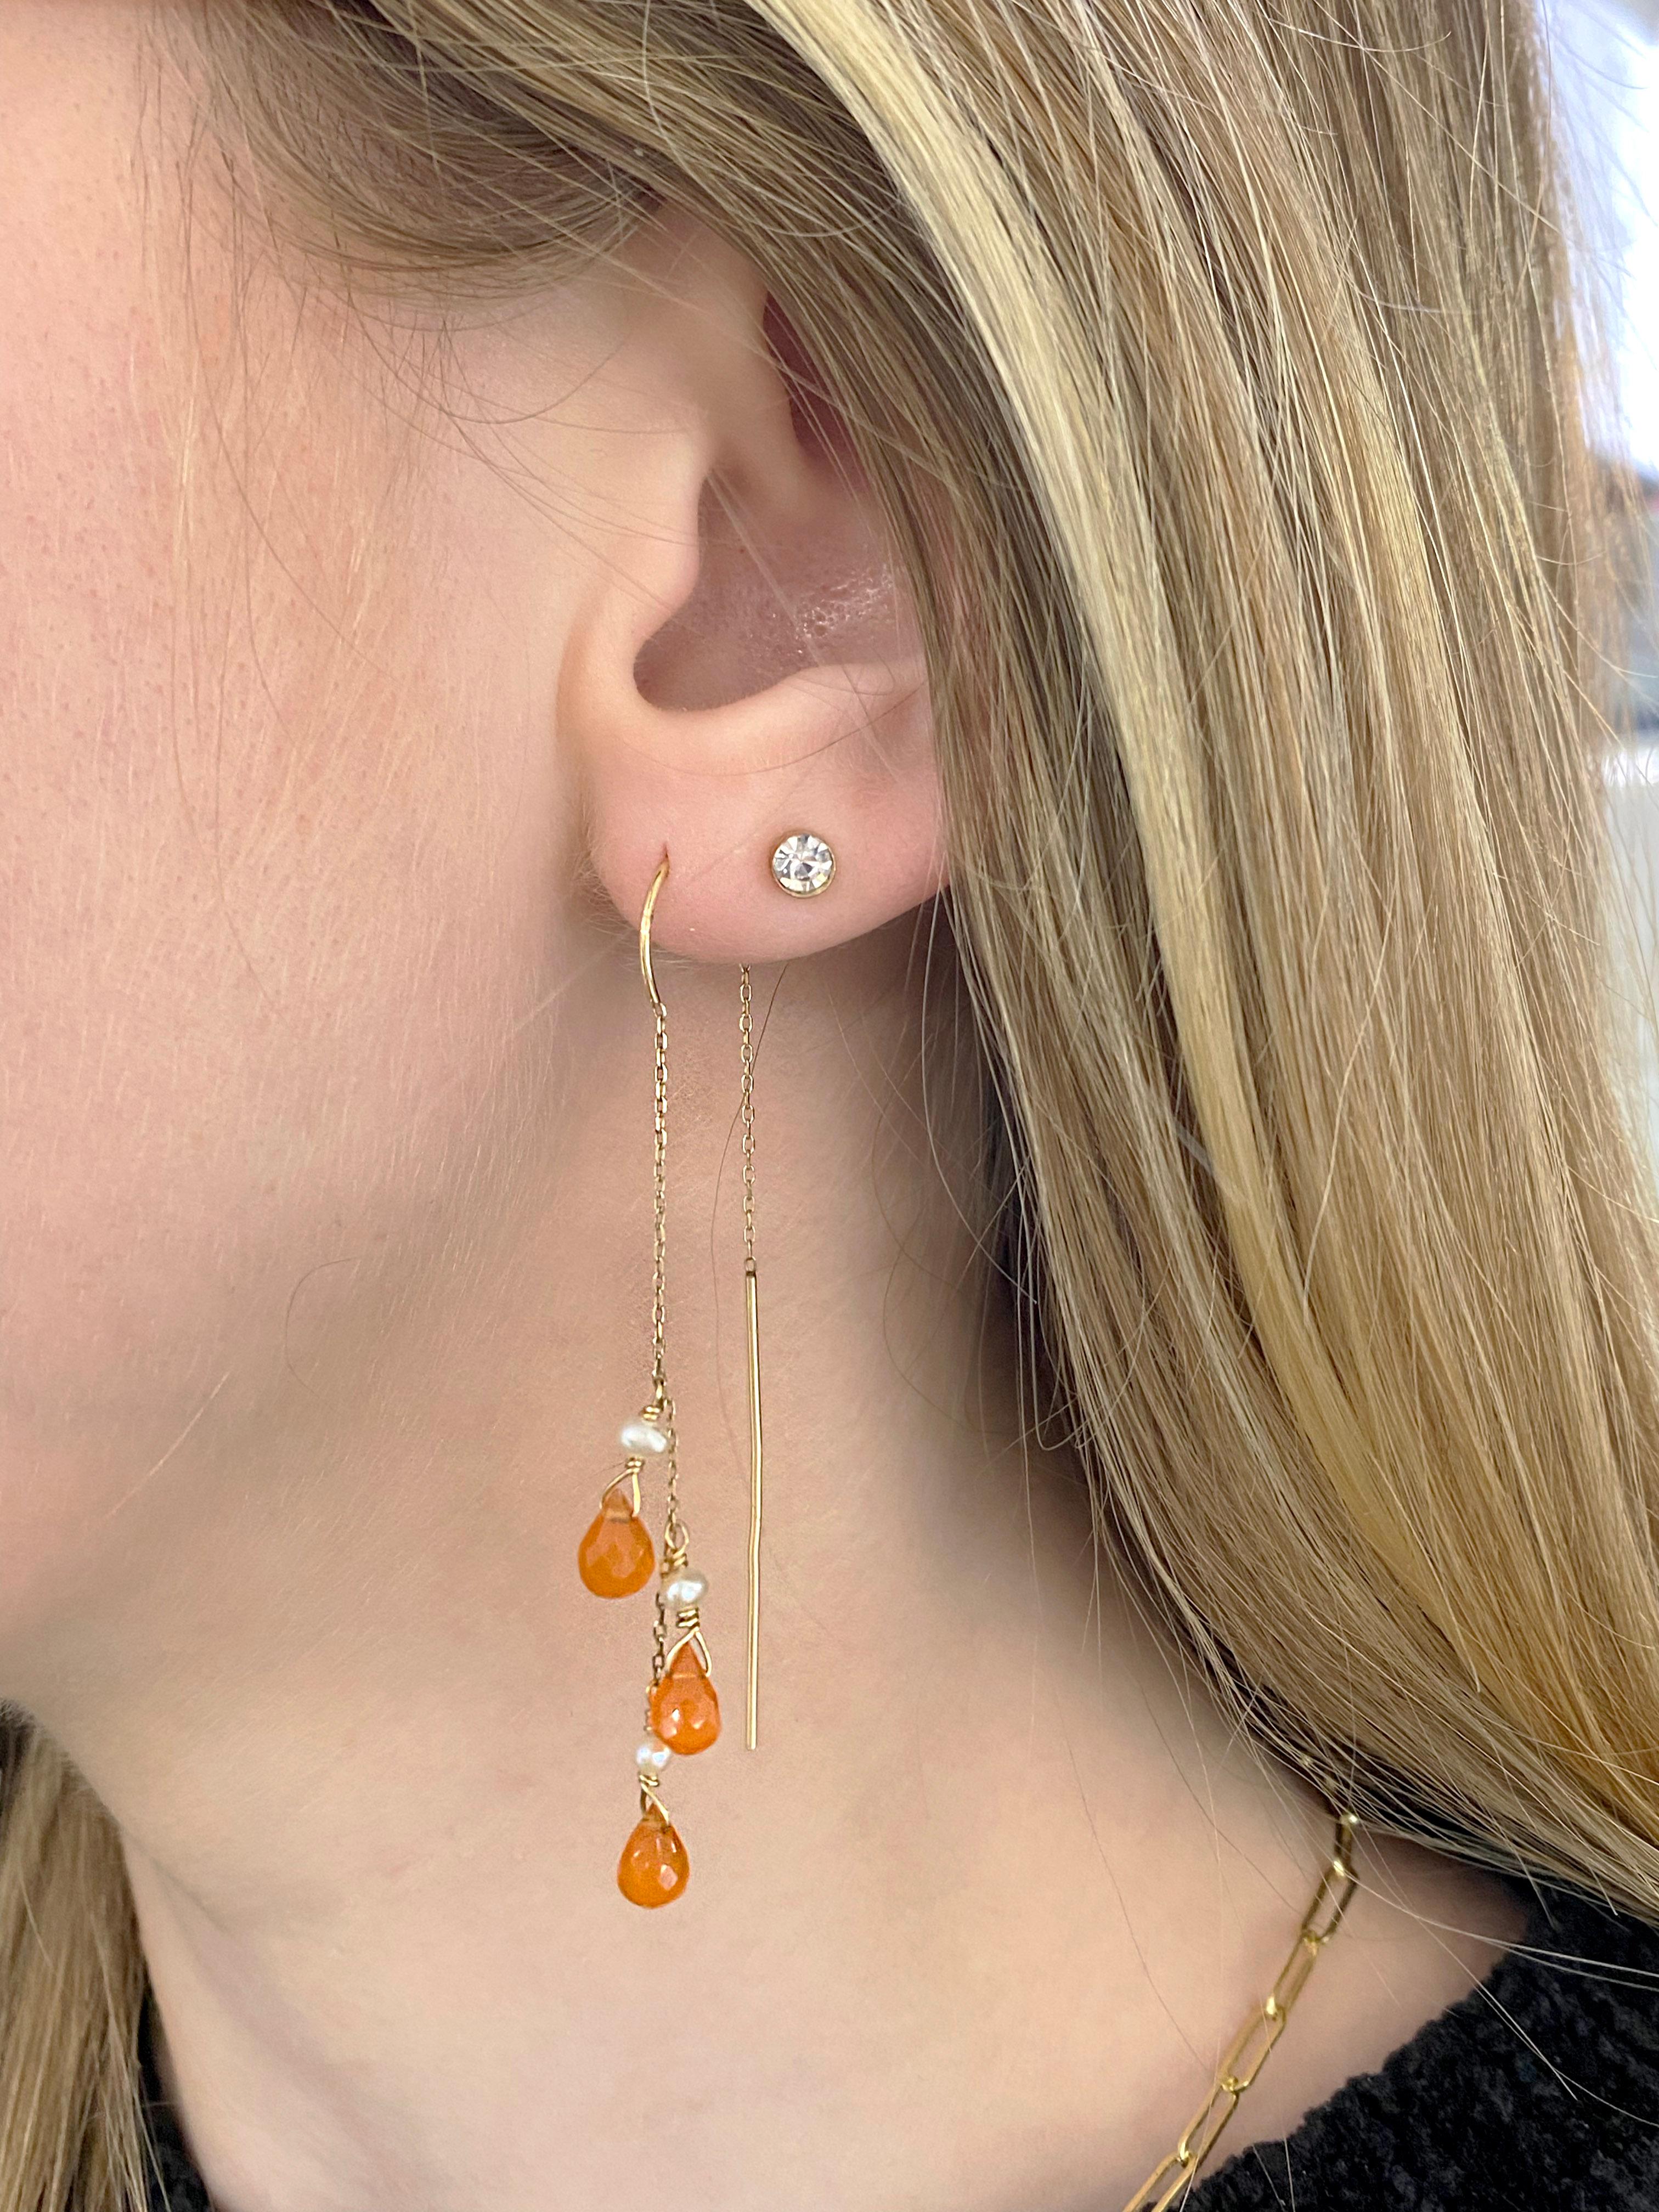 Pear Cut Gemstone Threader Earrings, Mexican Fire Opal and Pearl Earrings, Authentic